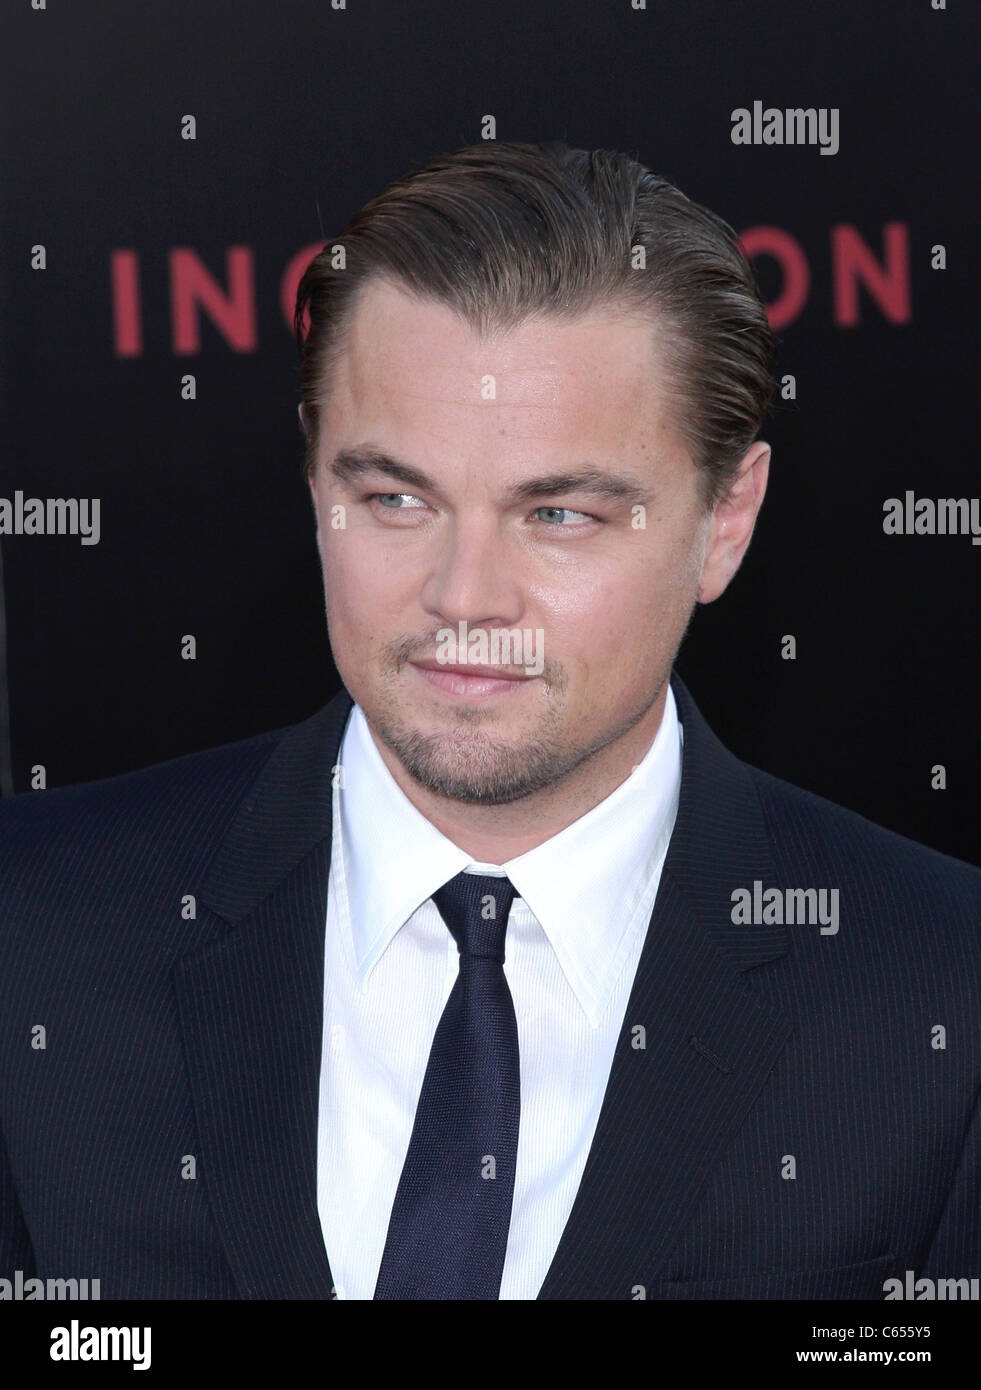 Leonardo DiCaprio at arrivals for INCEPTION Premiere, Grauman's Chinese Theatre, Los Angeles, CA July 13, 2010. Photo By: James Stock Photo